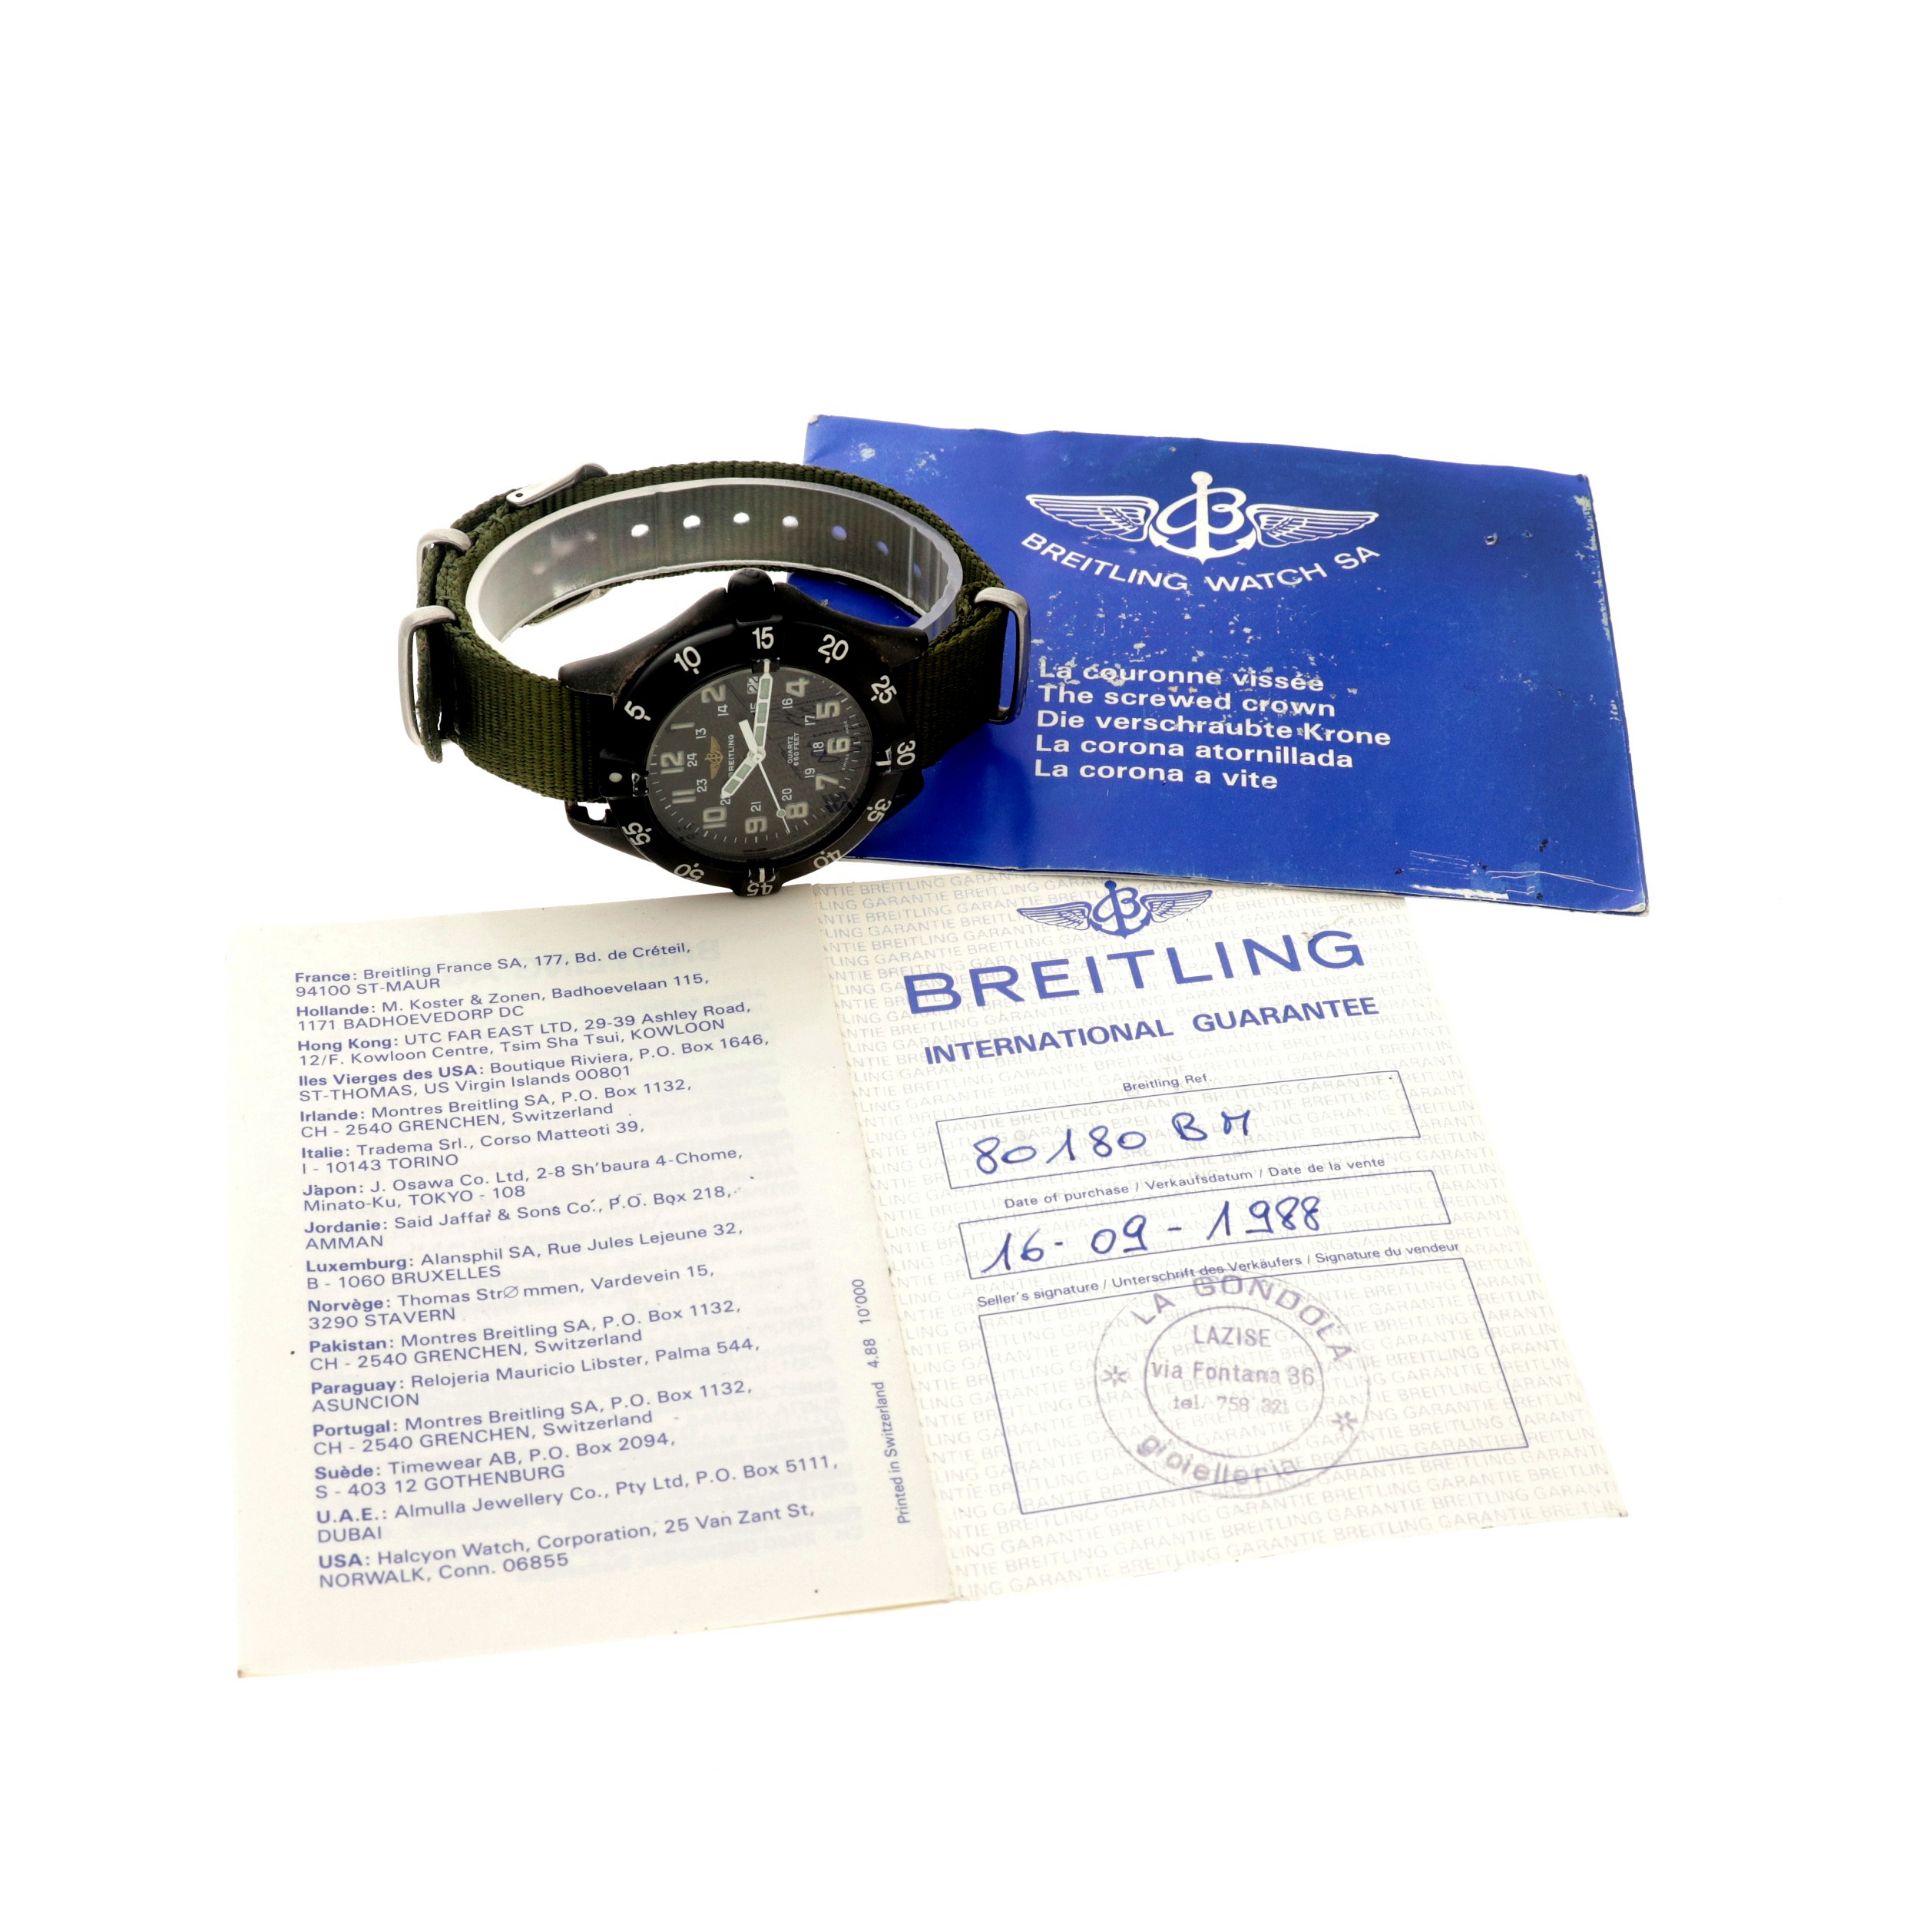 No Reserve - Breitling Colt Military 80180 - Men's watch - 1988. - Image 6 of 7